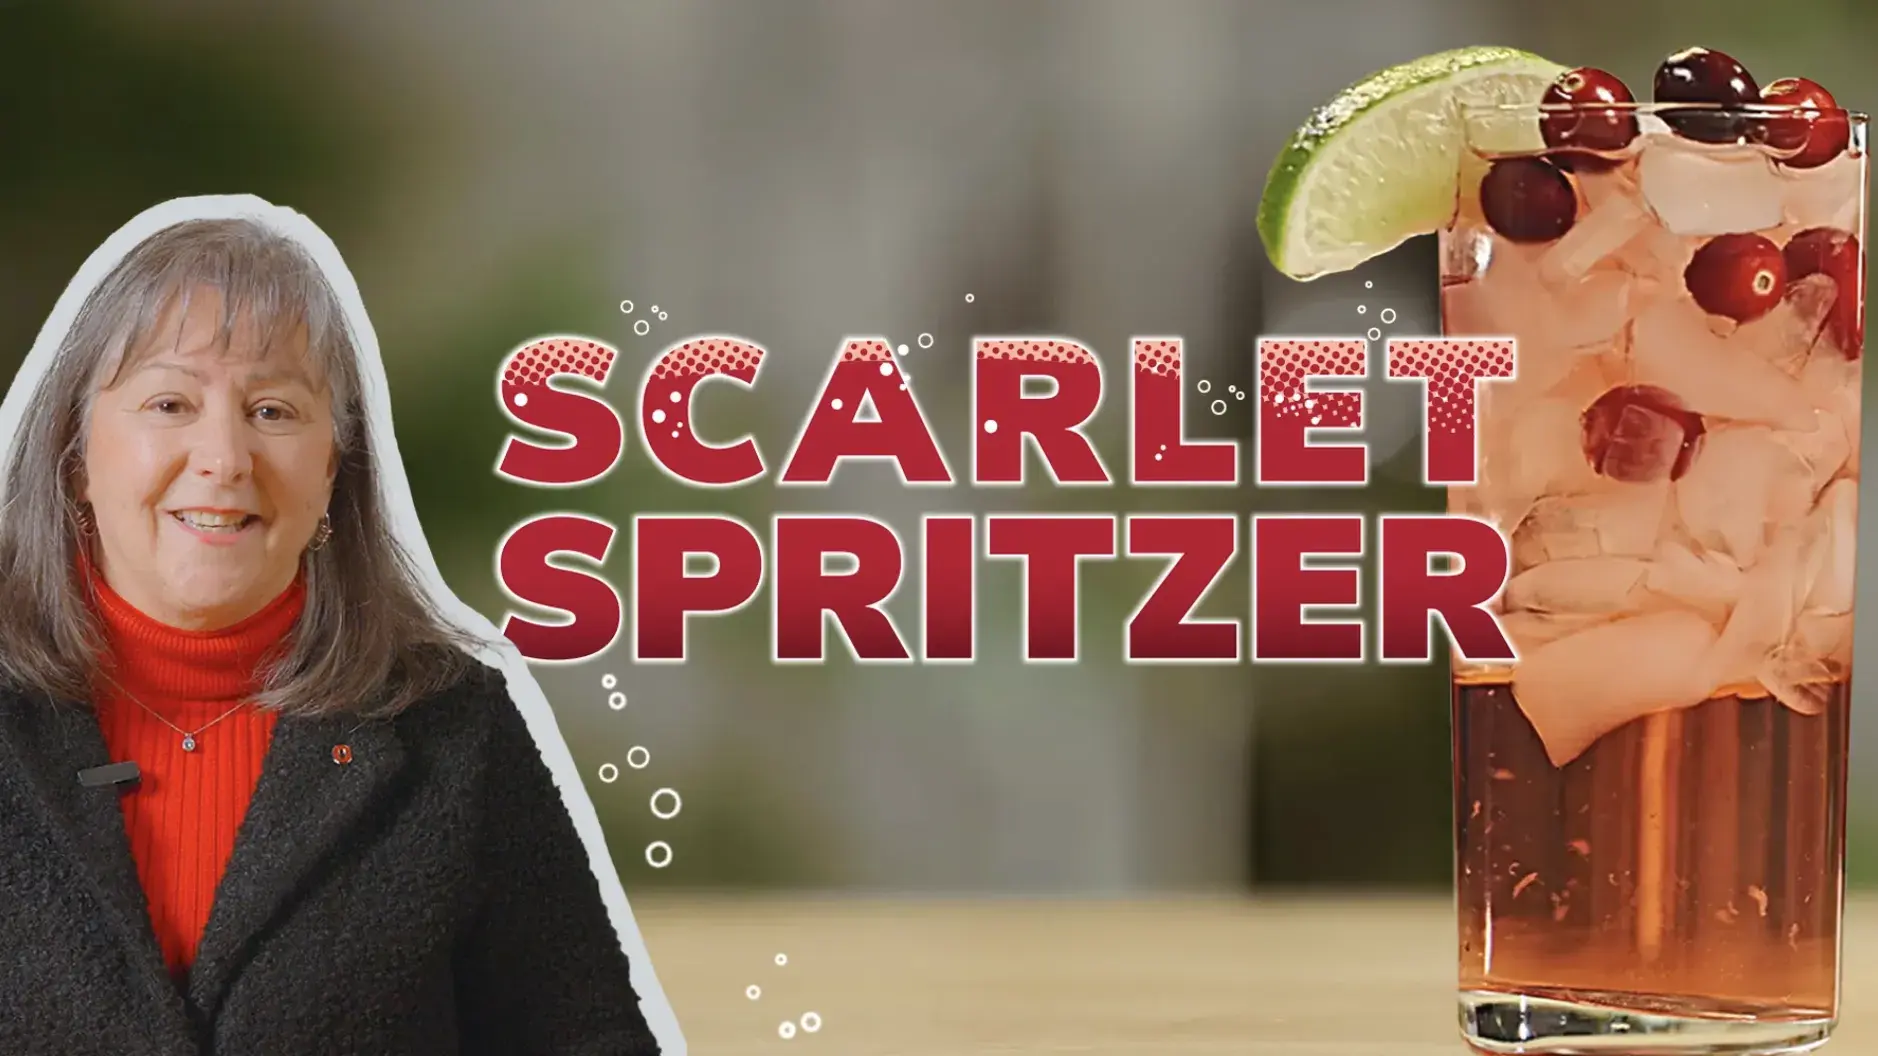 Mary Ranz Calhoun introducing what a Scarlet Spritzer drink is